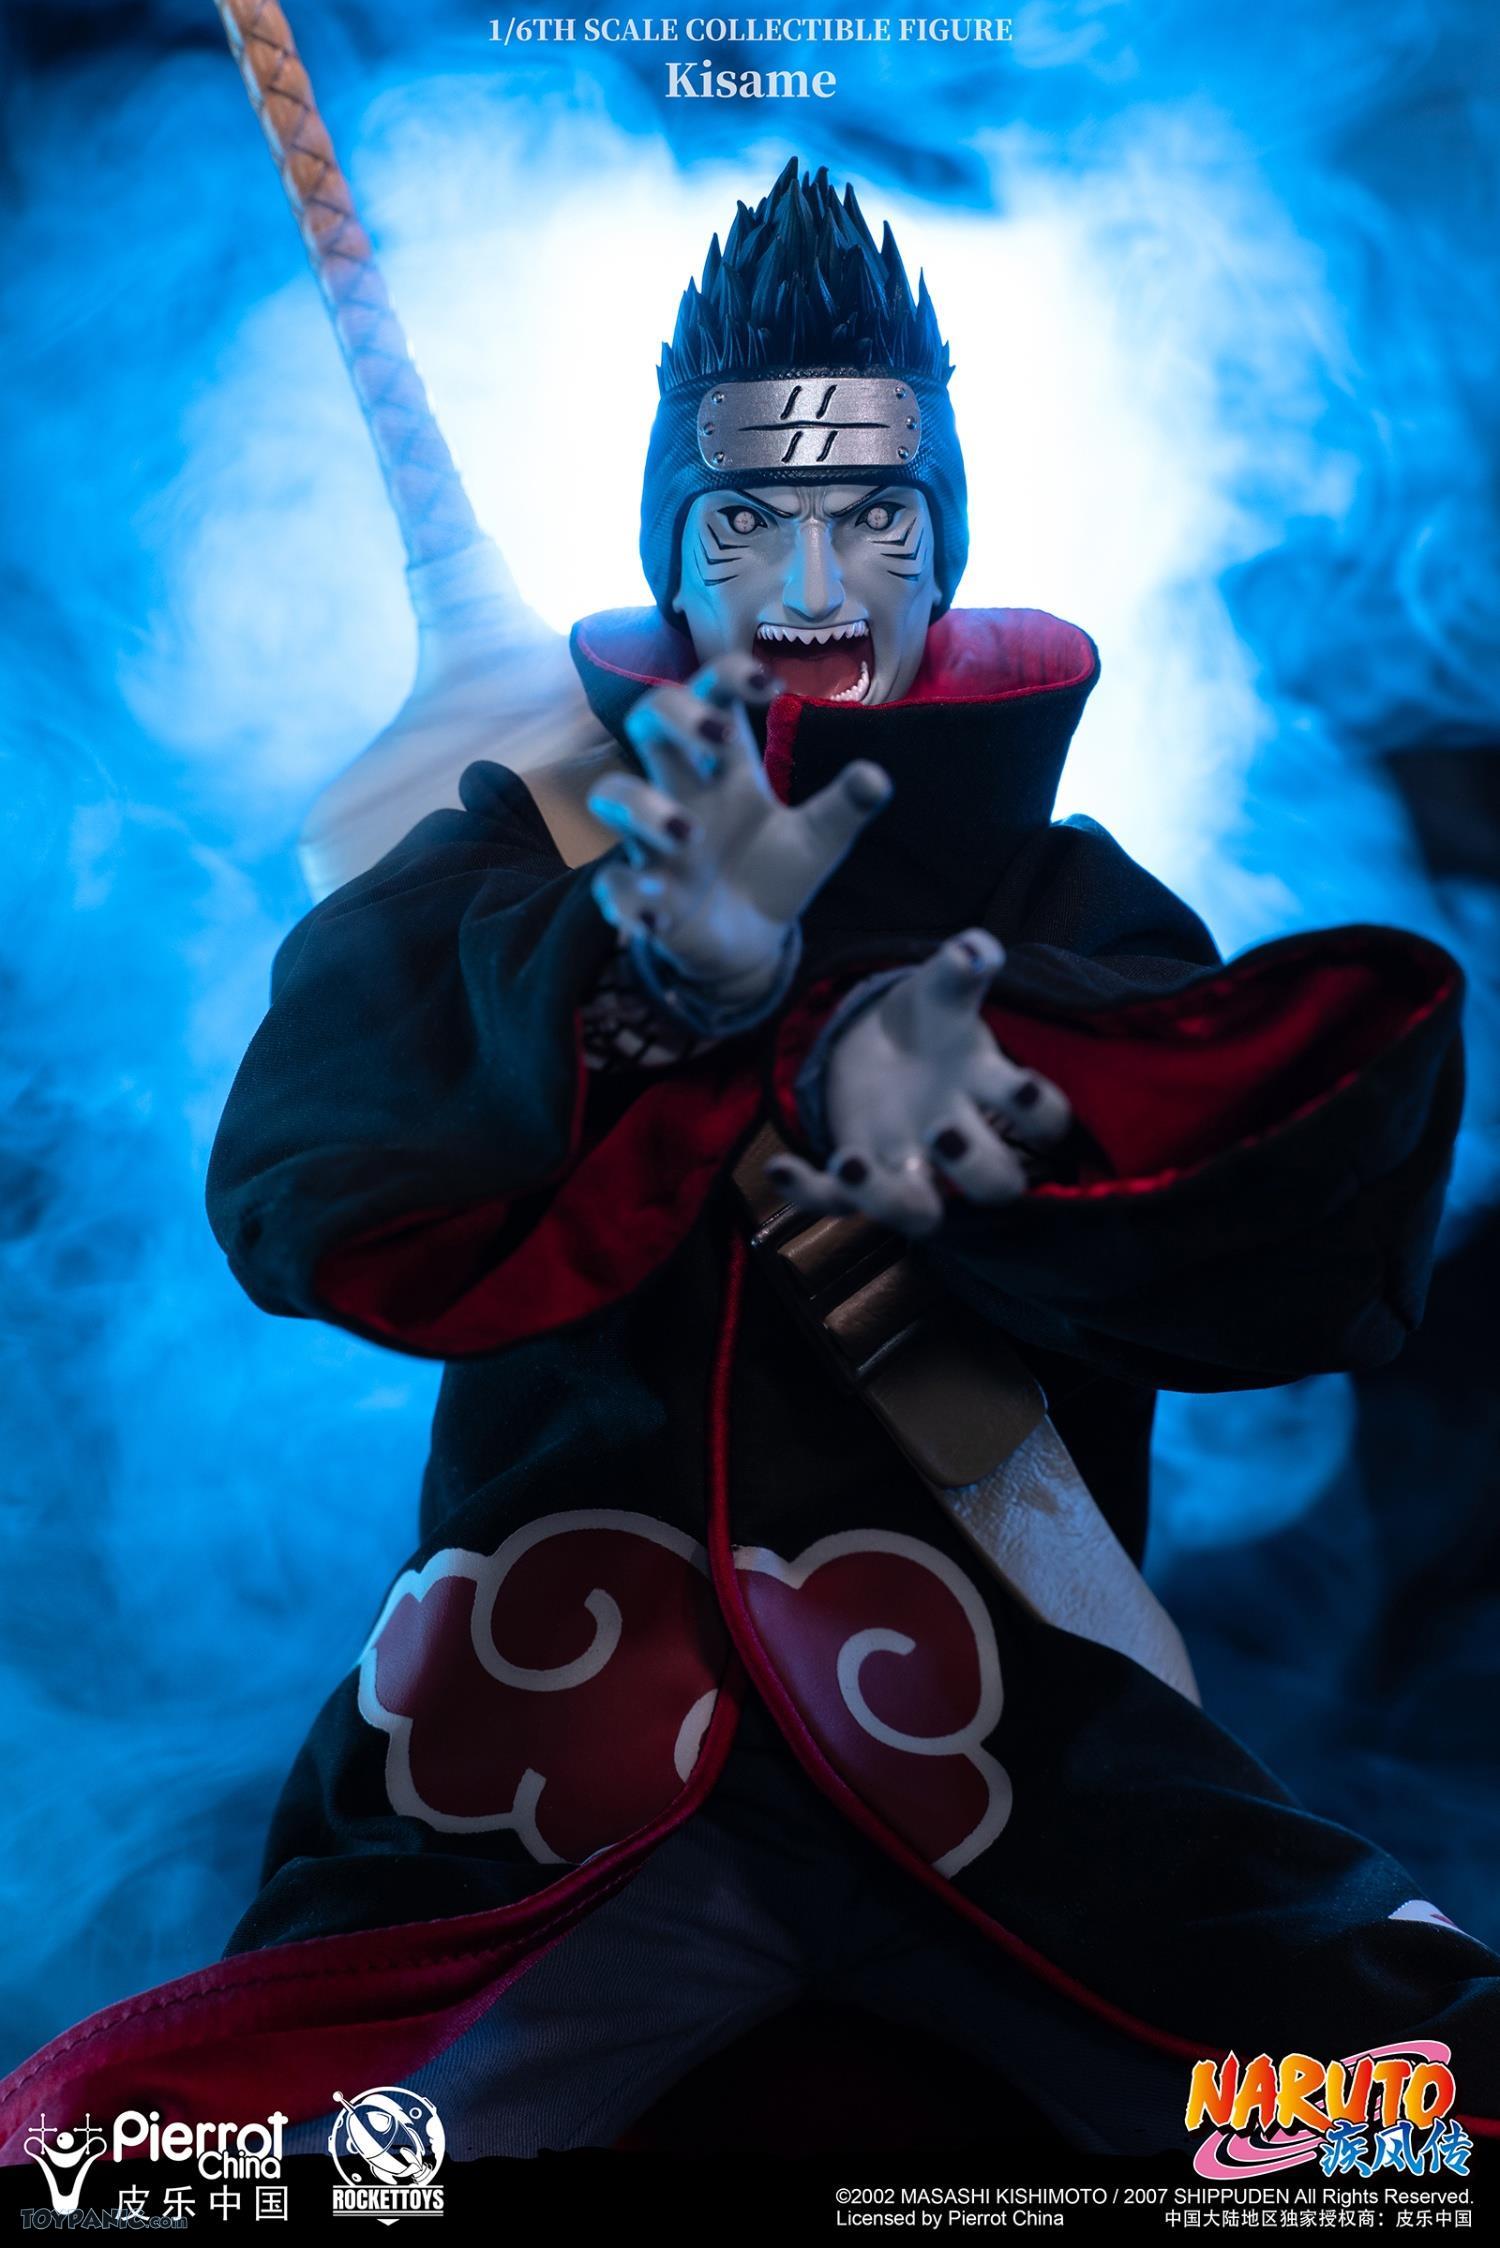 fantasy - NEW PRODUCT: Rocket Toys ROC-007 1/6 Scale Kisame 221202460438PM_3657584